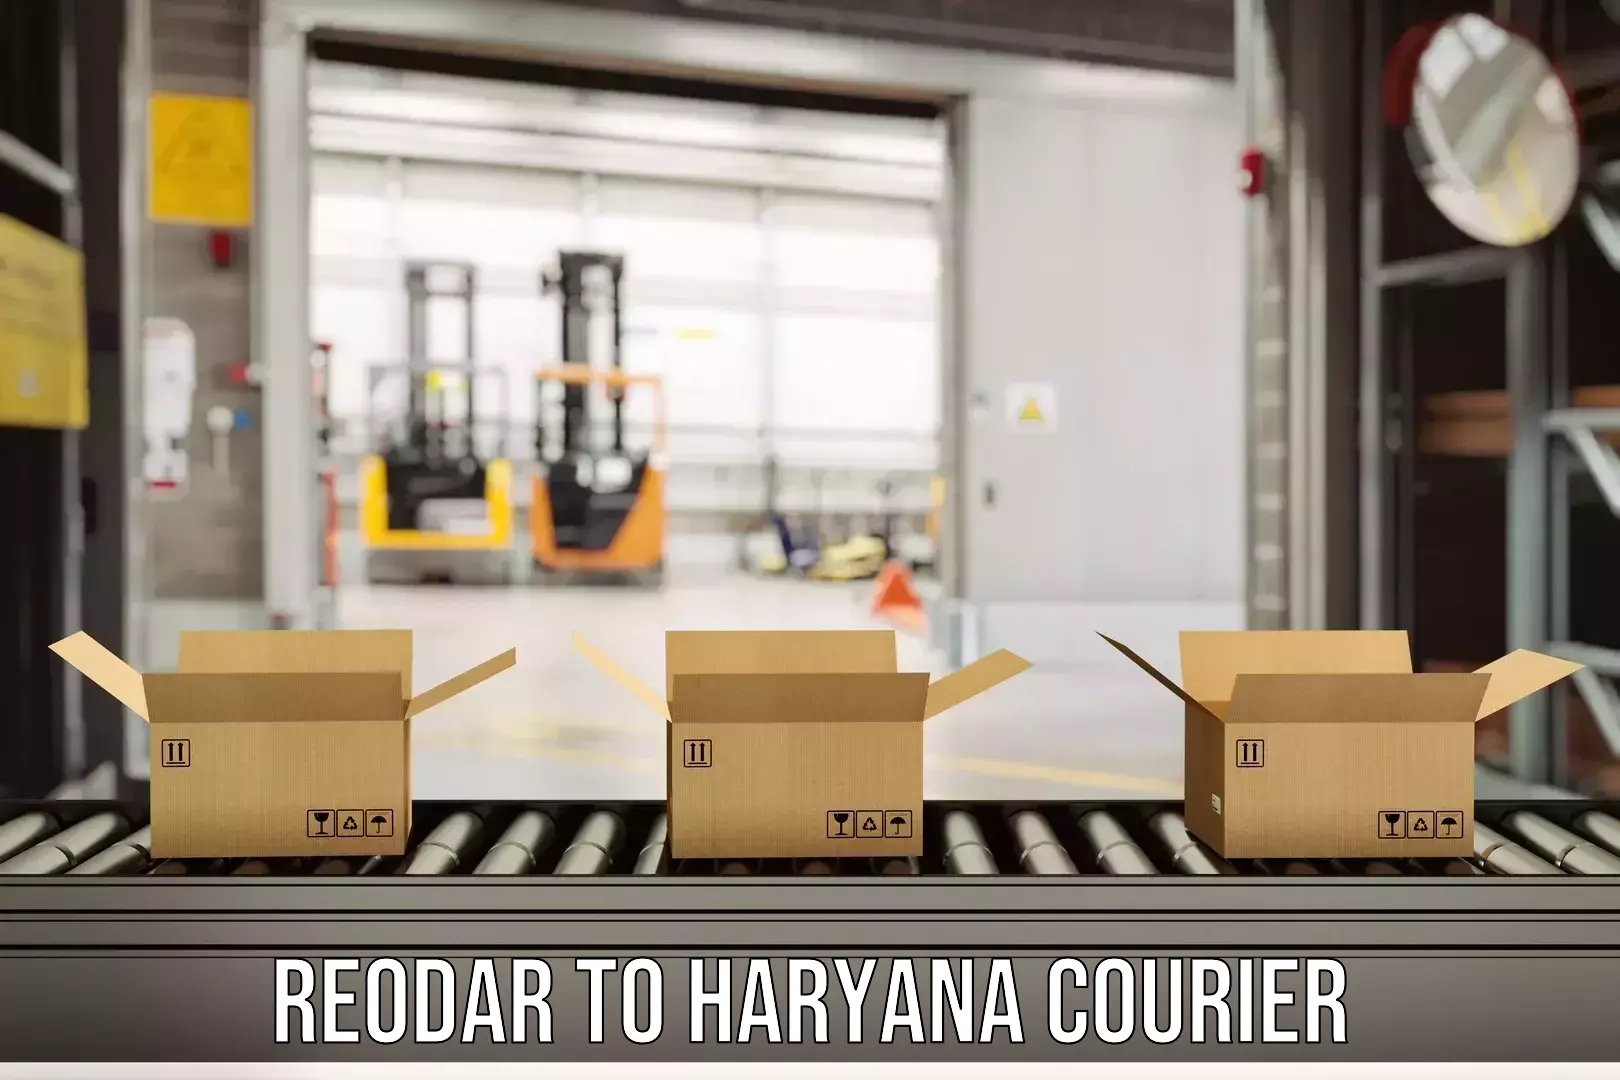 Express package delivery in Reodar to Bilaspur Haryana